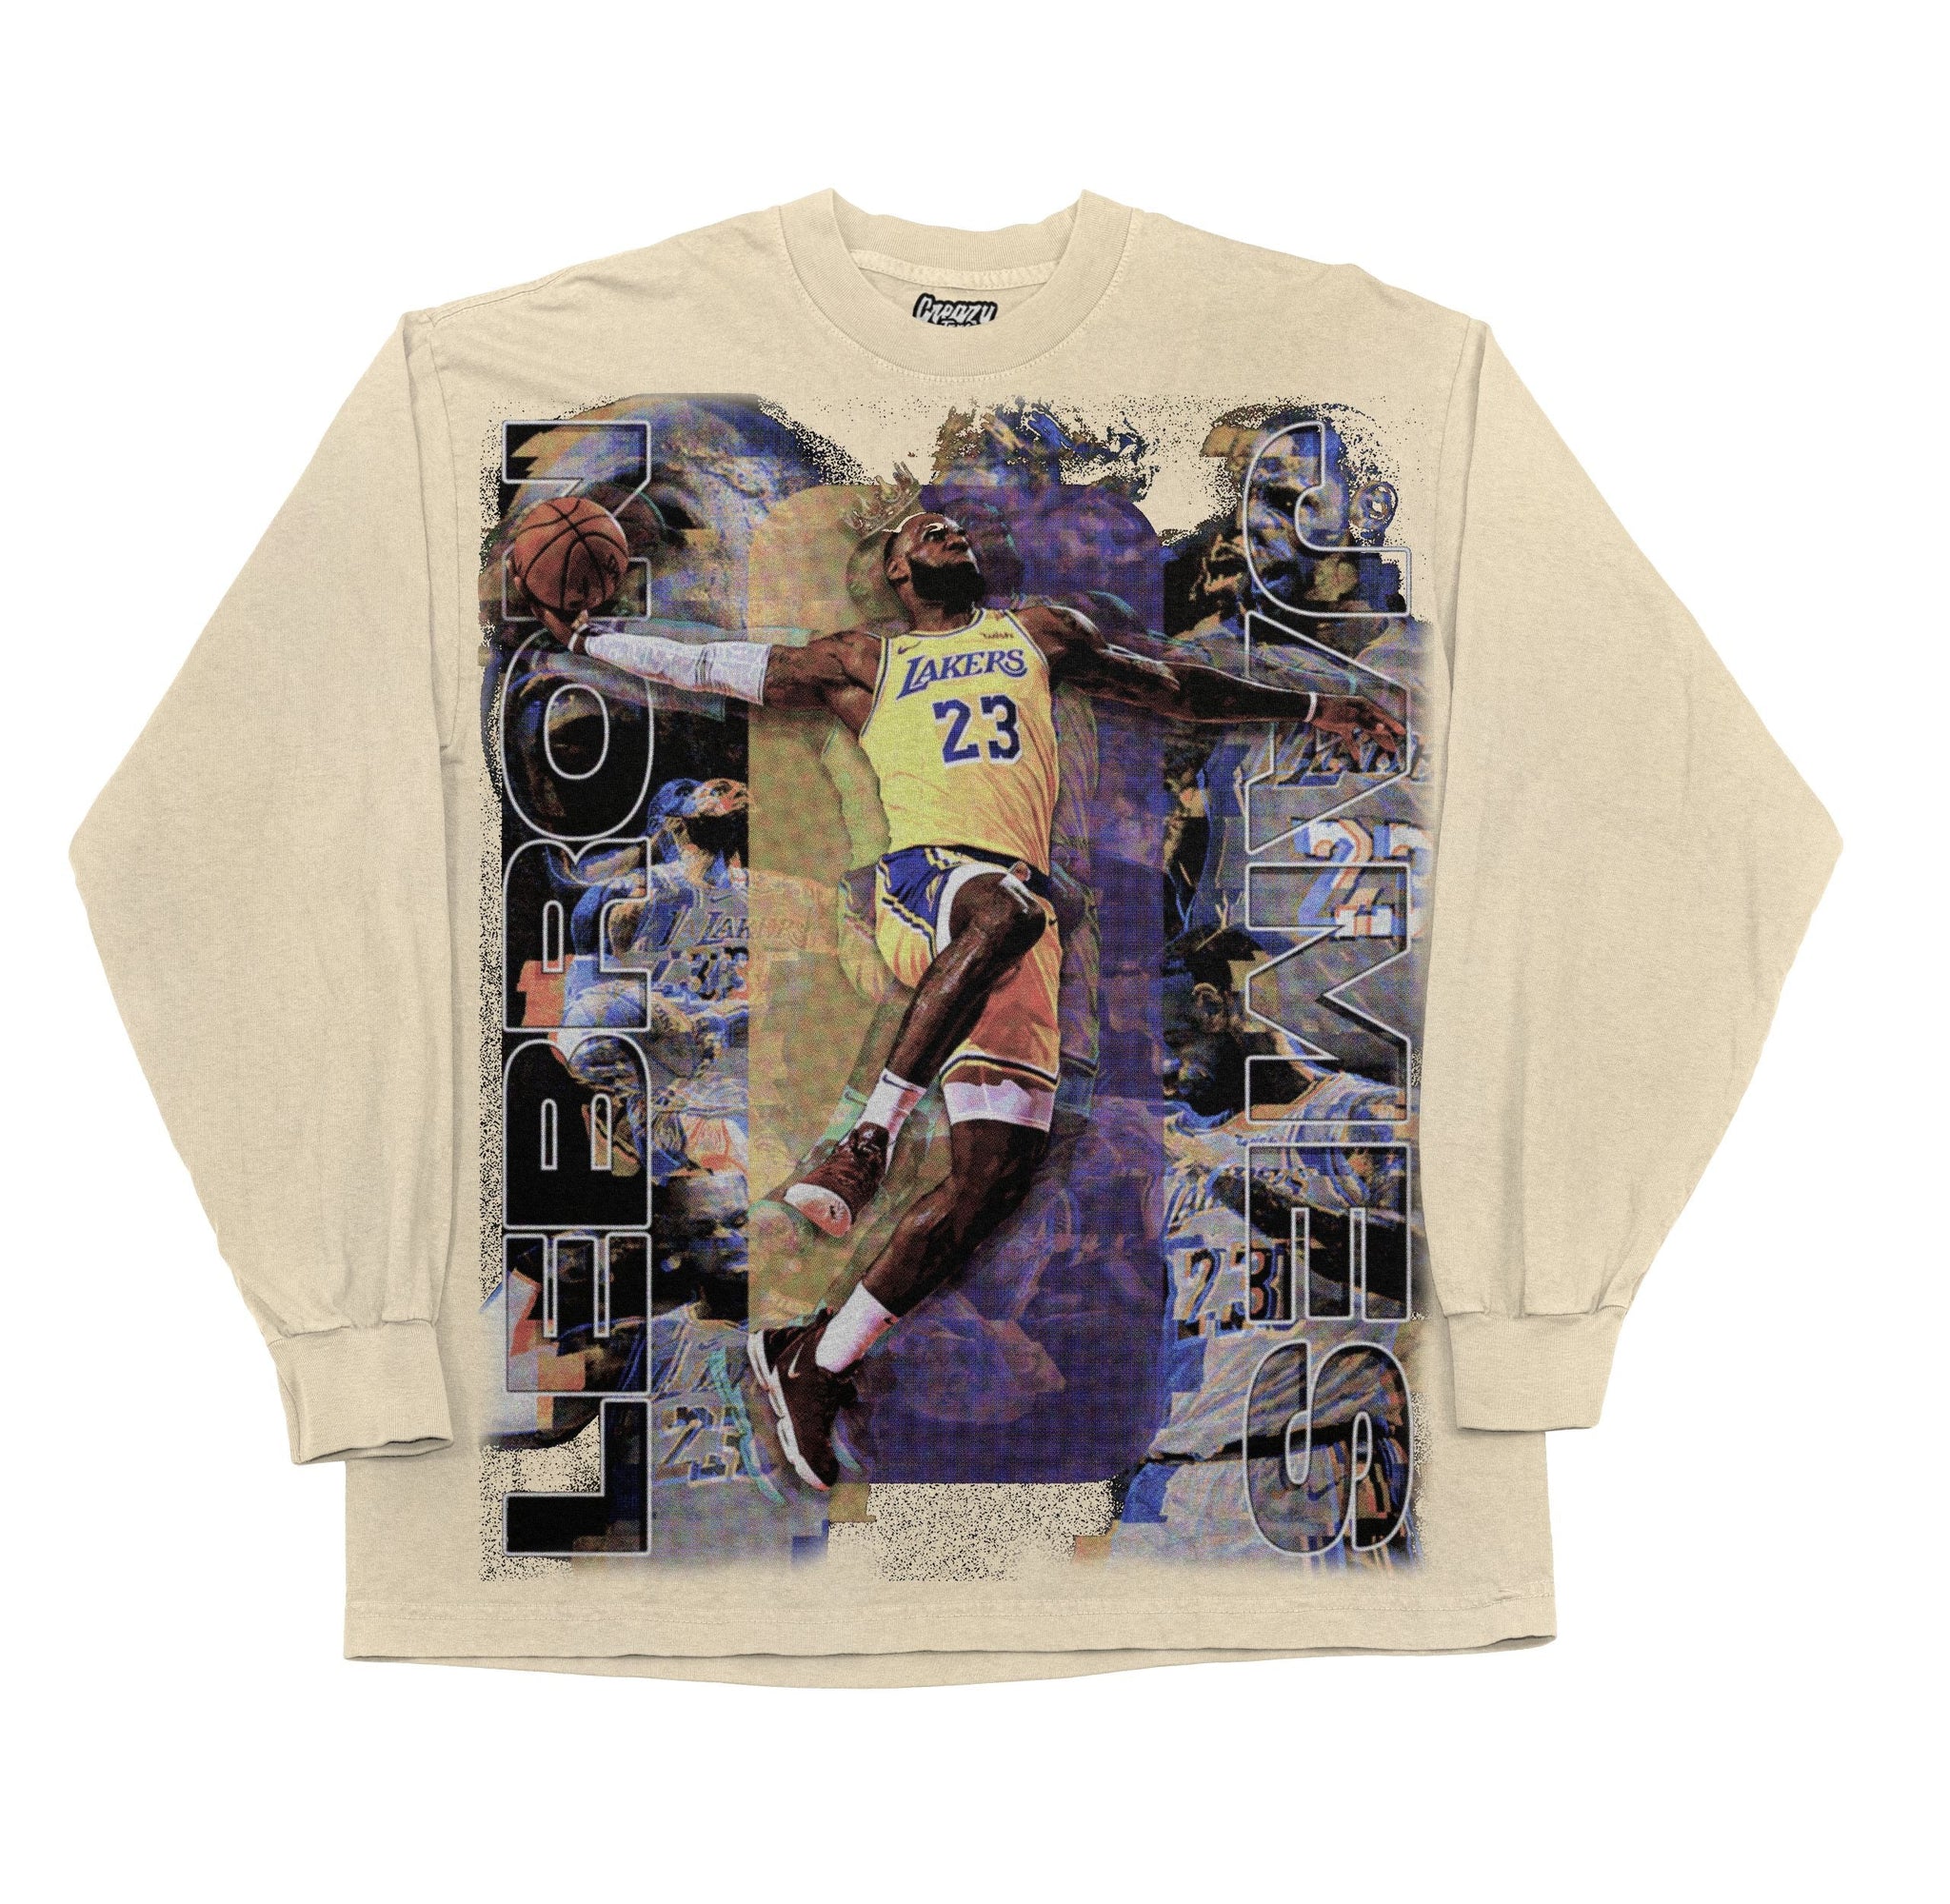 Lebron James Long Sleeved Tee Tee Greazy Tees XS Off White Oversized